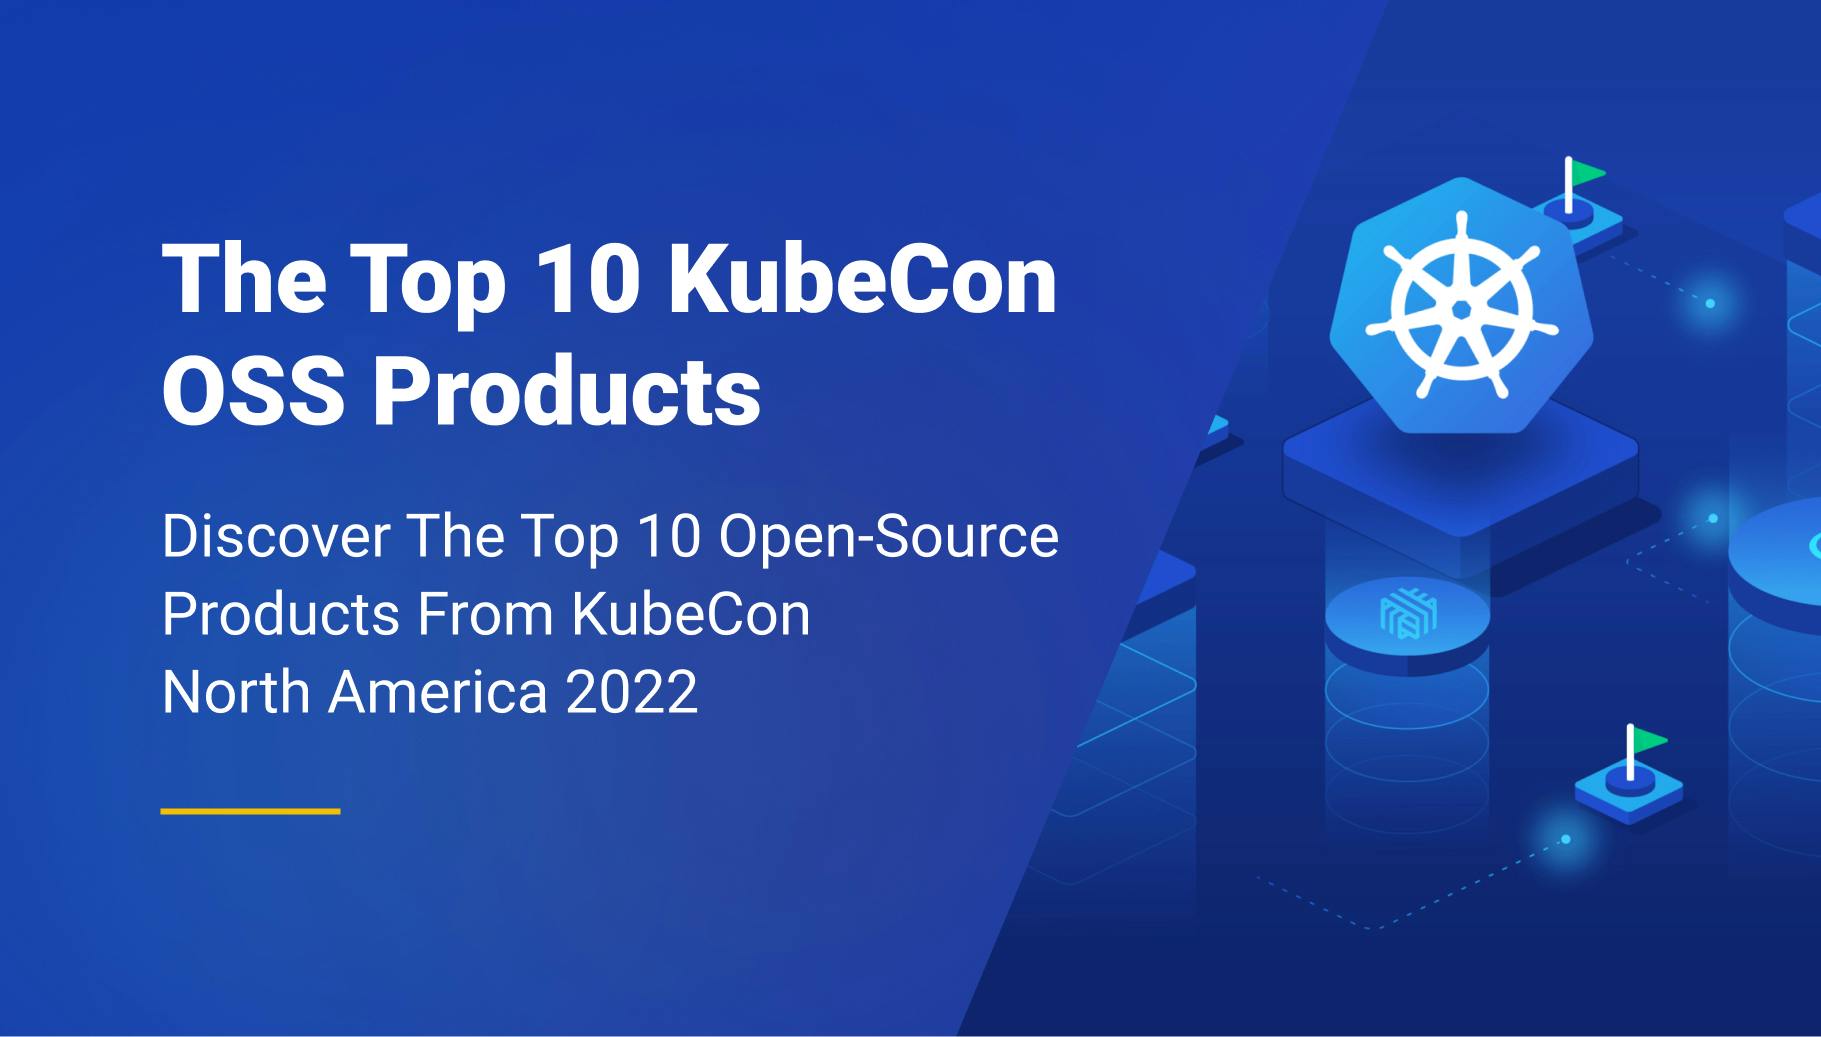 The Top 10 Open-Source Products From KubeCon North America 2022 - Qovery